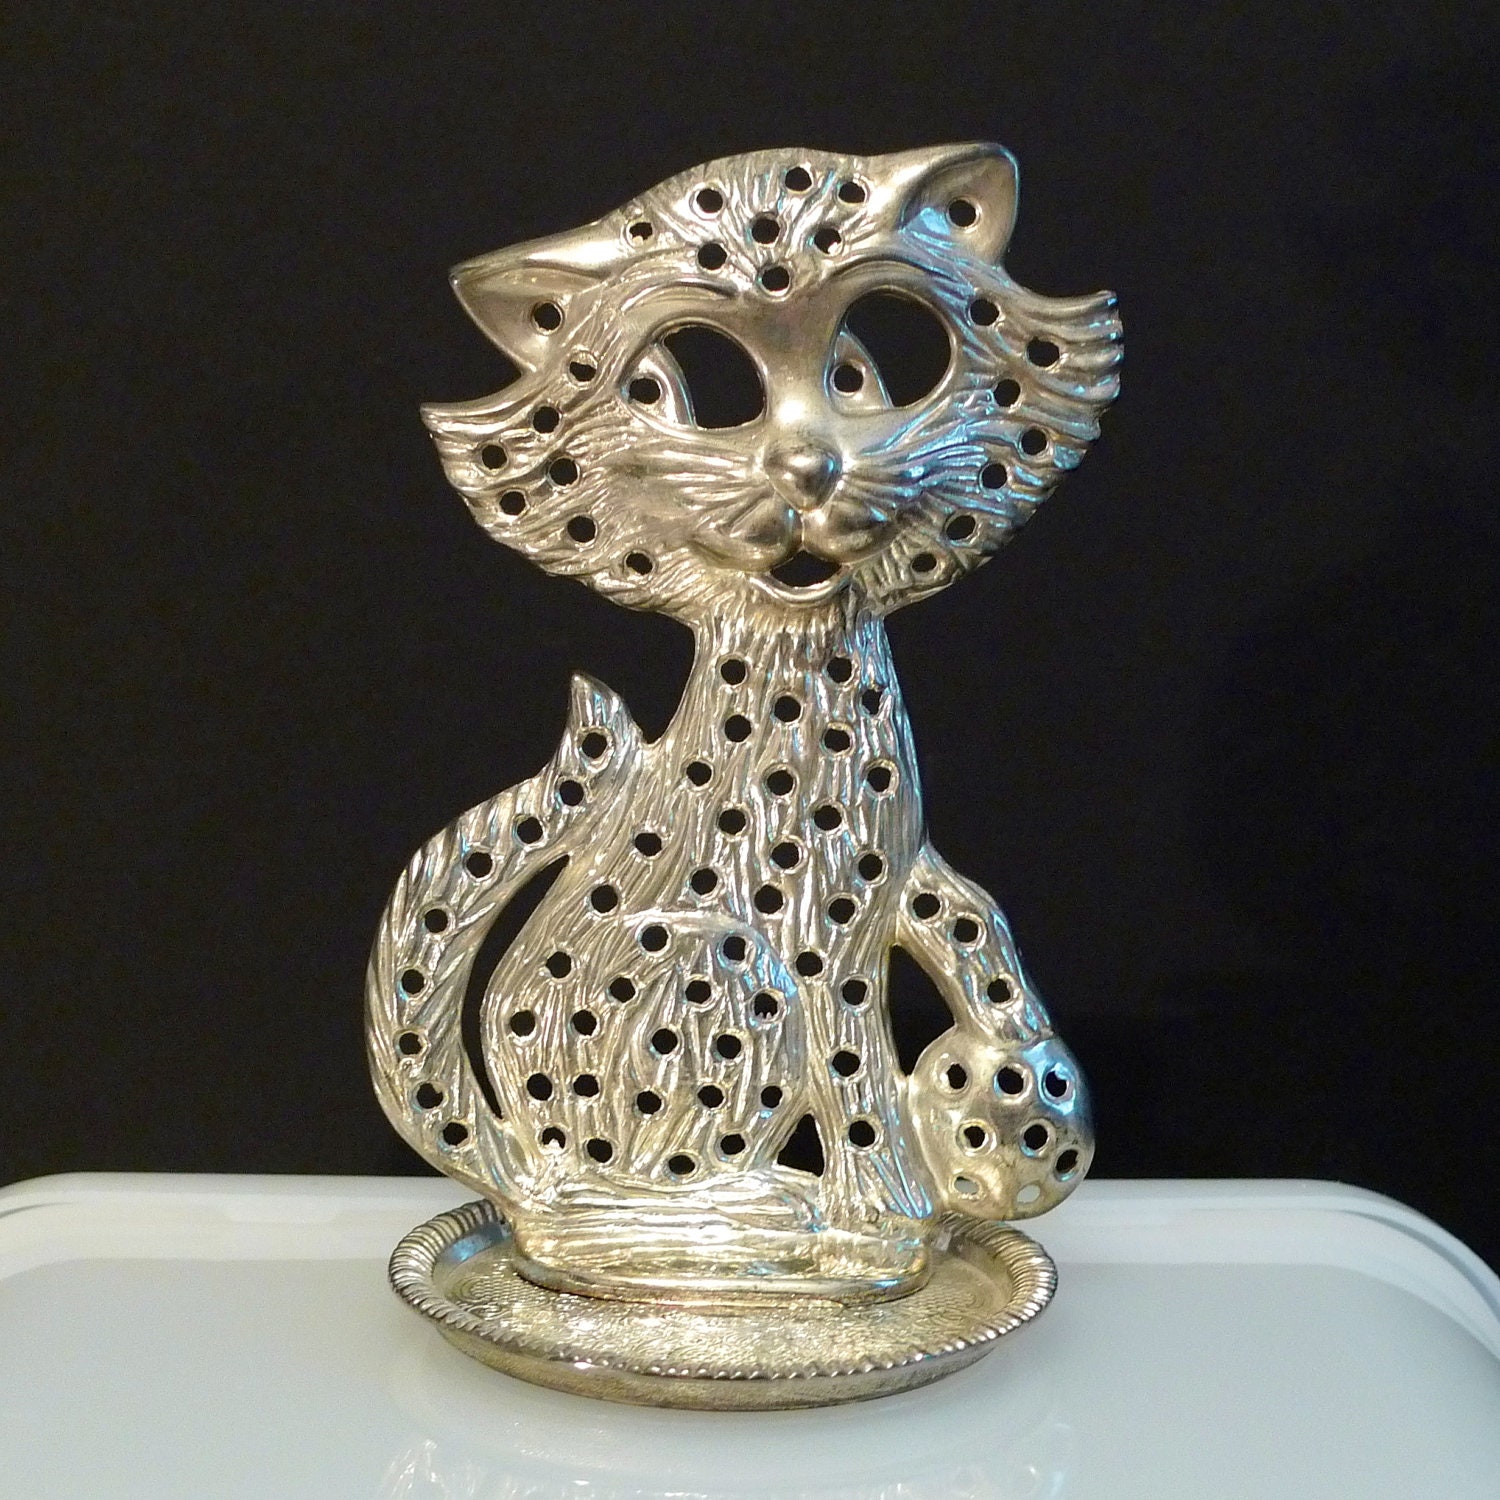 Earring Tree Earring Stand Silverplated Earring Holder Vintage Kitten Cat with Ball Display Jewelry Collection FREE SHIPPING 60's 70's - plattermatter2